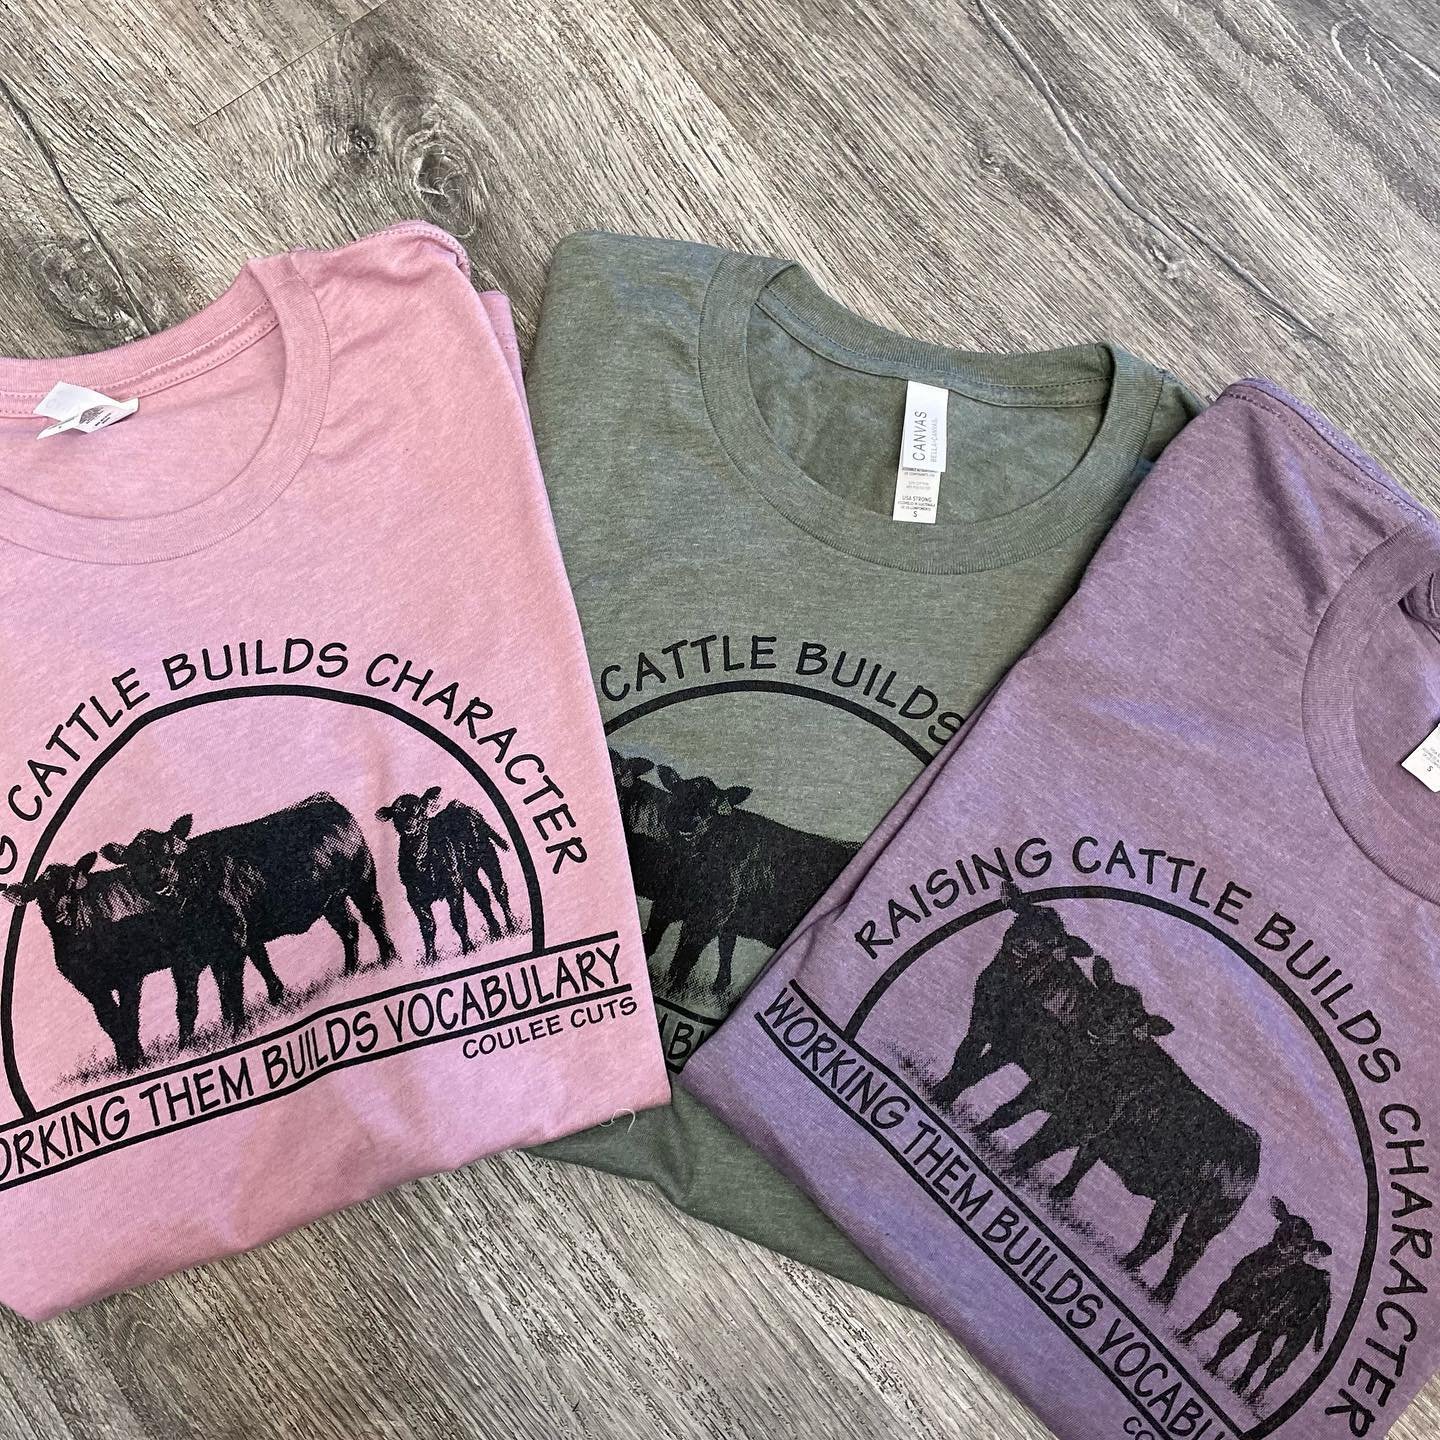 Raising Cattle builds character, working them builds vocab Tshirts.jpg